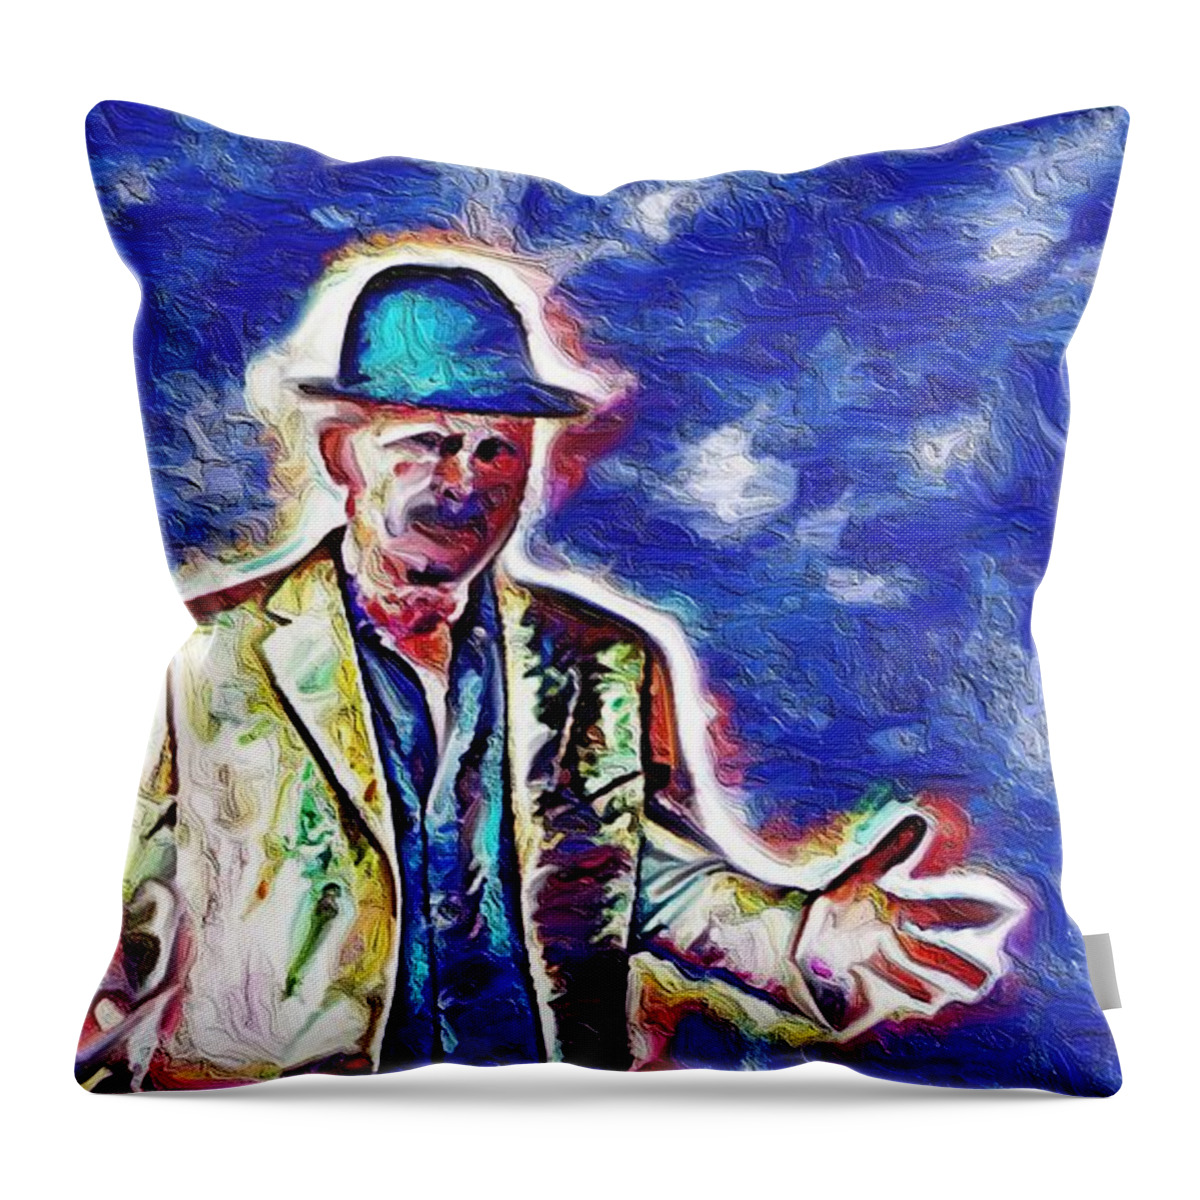 The Crooner At Large Throw Pillow featuring the mixed media The Crooner at Large 2 by Bencasso Barnesquiat